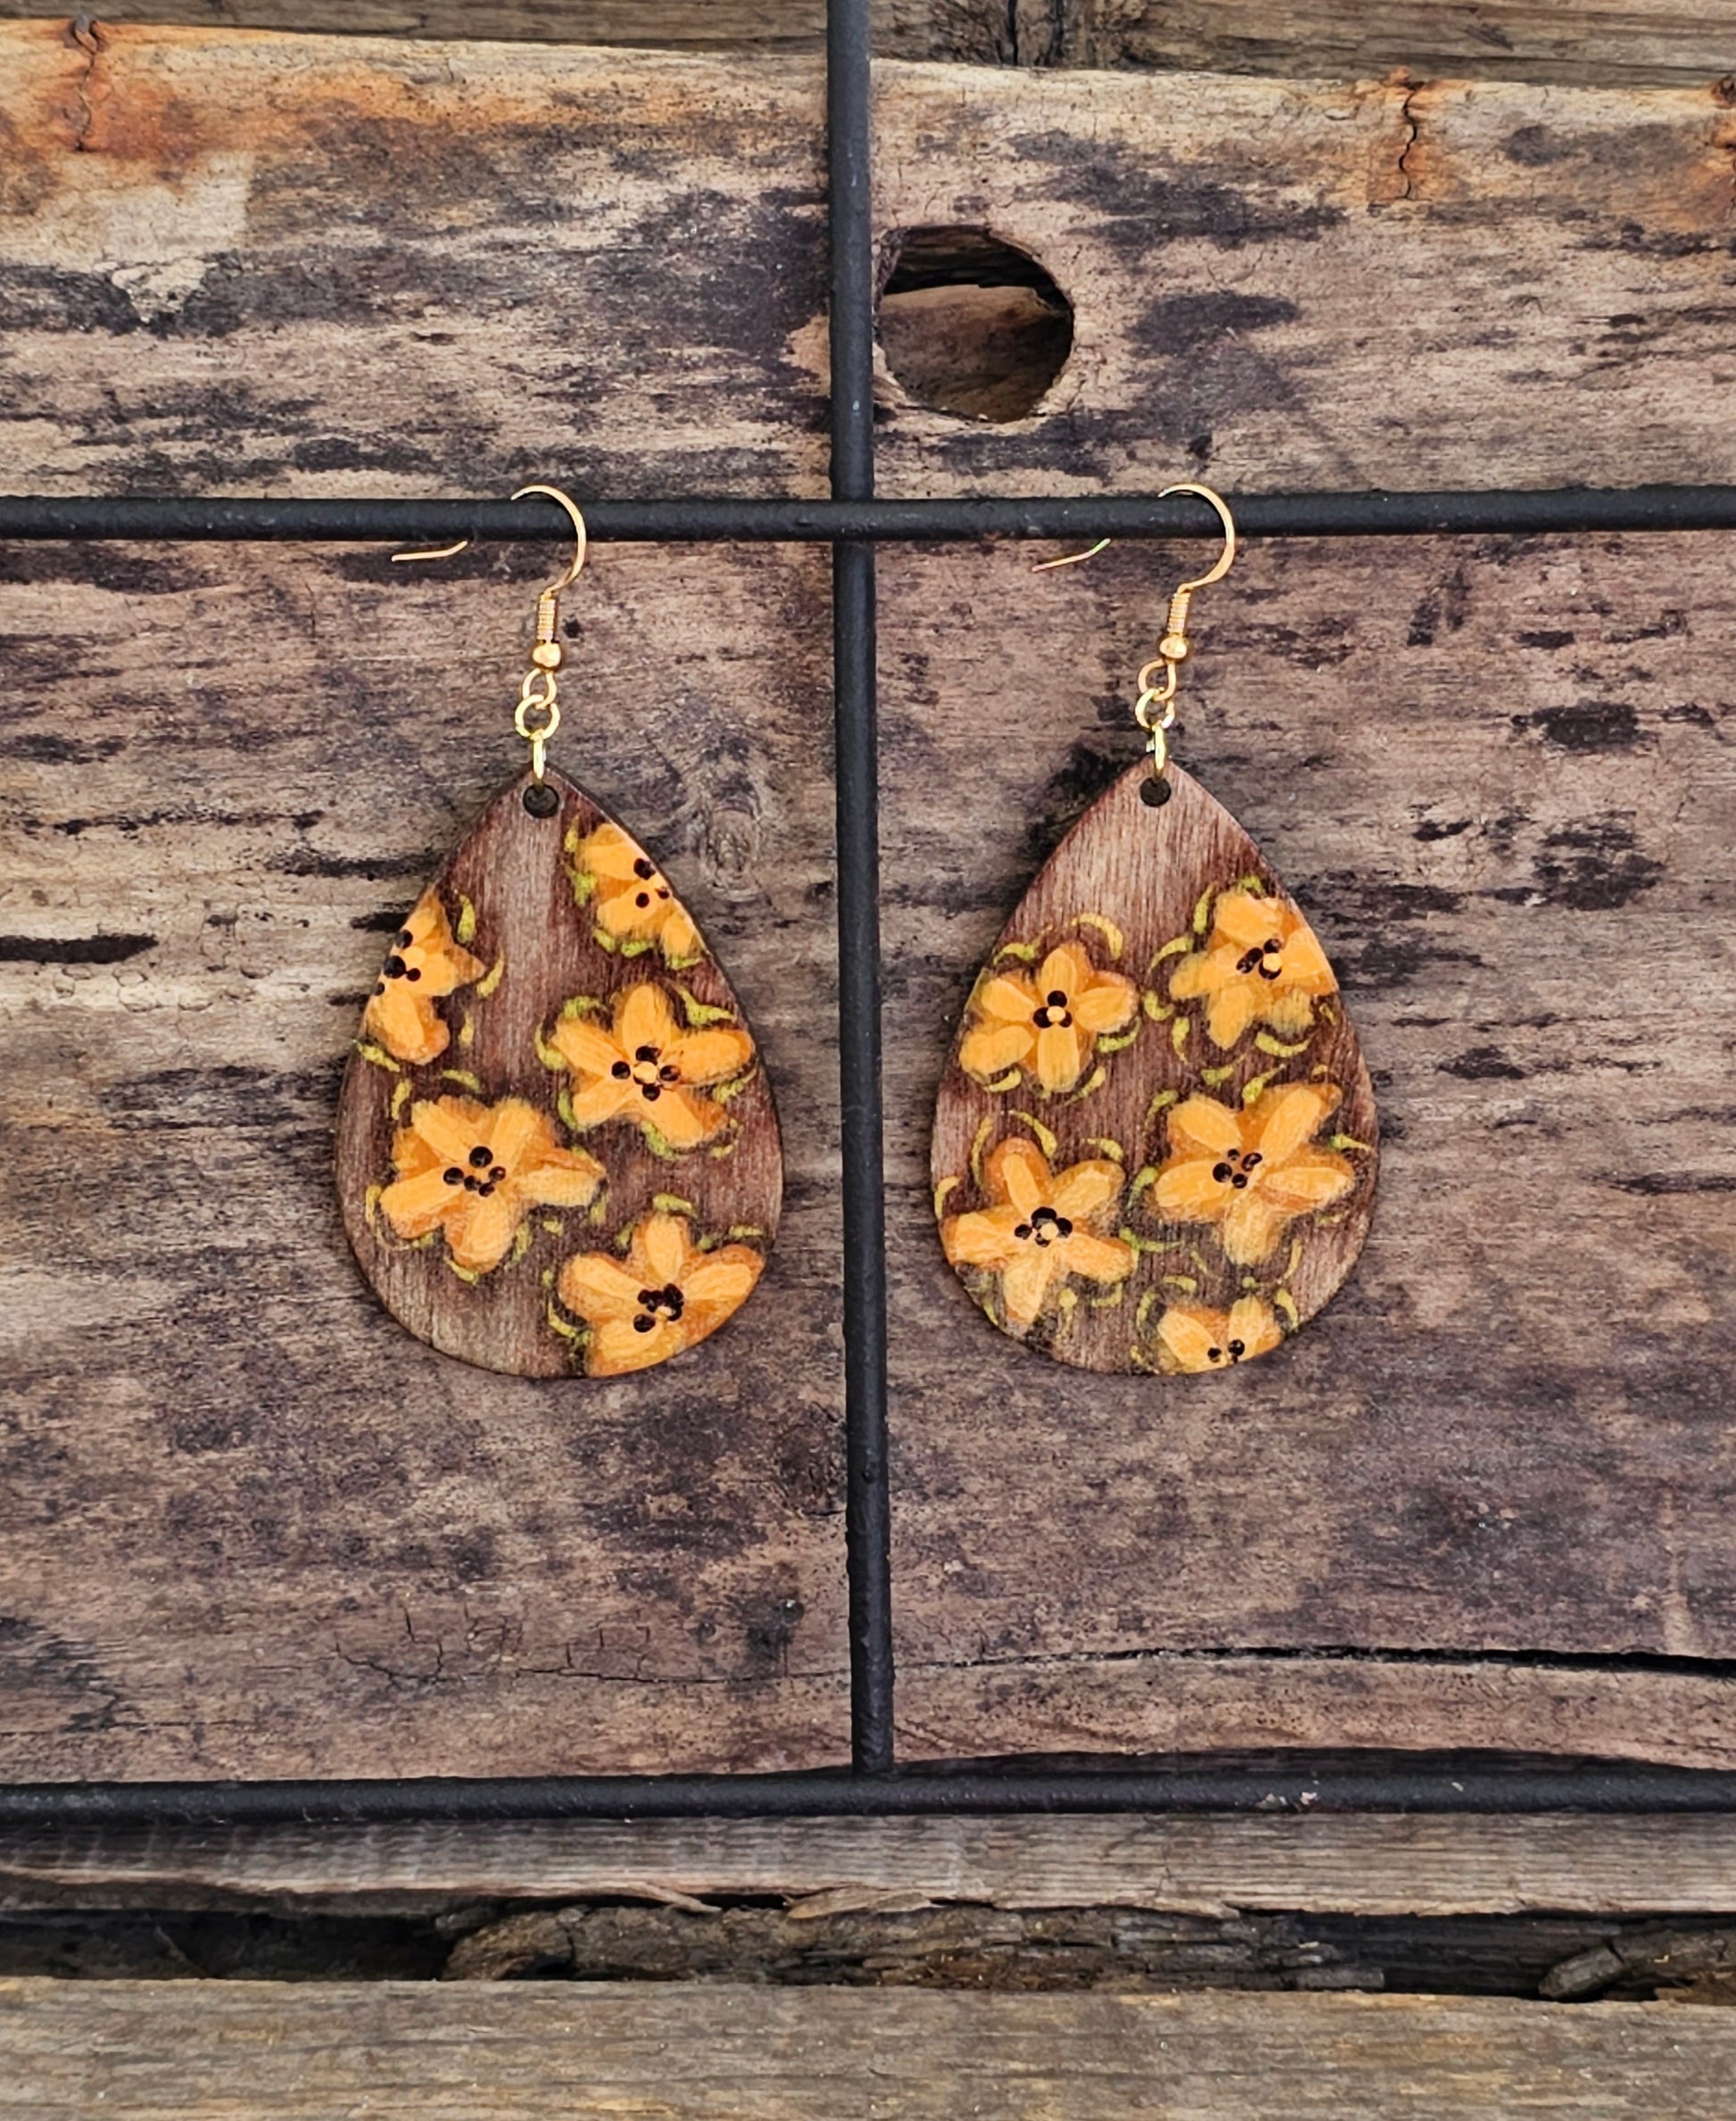 Hand Painted Ultra Lightweight Wooden Earrings. Watercolor and Acrylic.  Espresso brown washed background color with muted orange lilies painted design. Dark brown painted edge detail with accents of gold. Teardrop in shape. Back is painted in complimentary color. 14kg over Sterling Silver Findings. Hangs 2 1/4" in Length